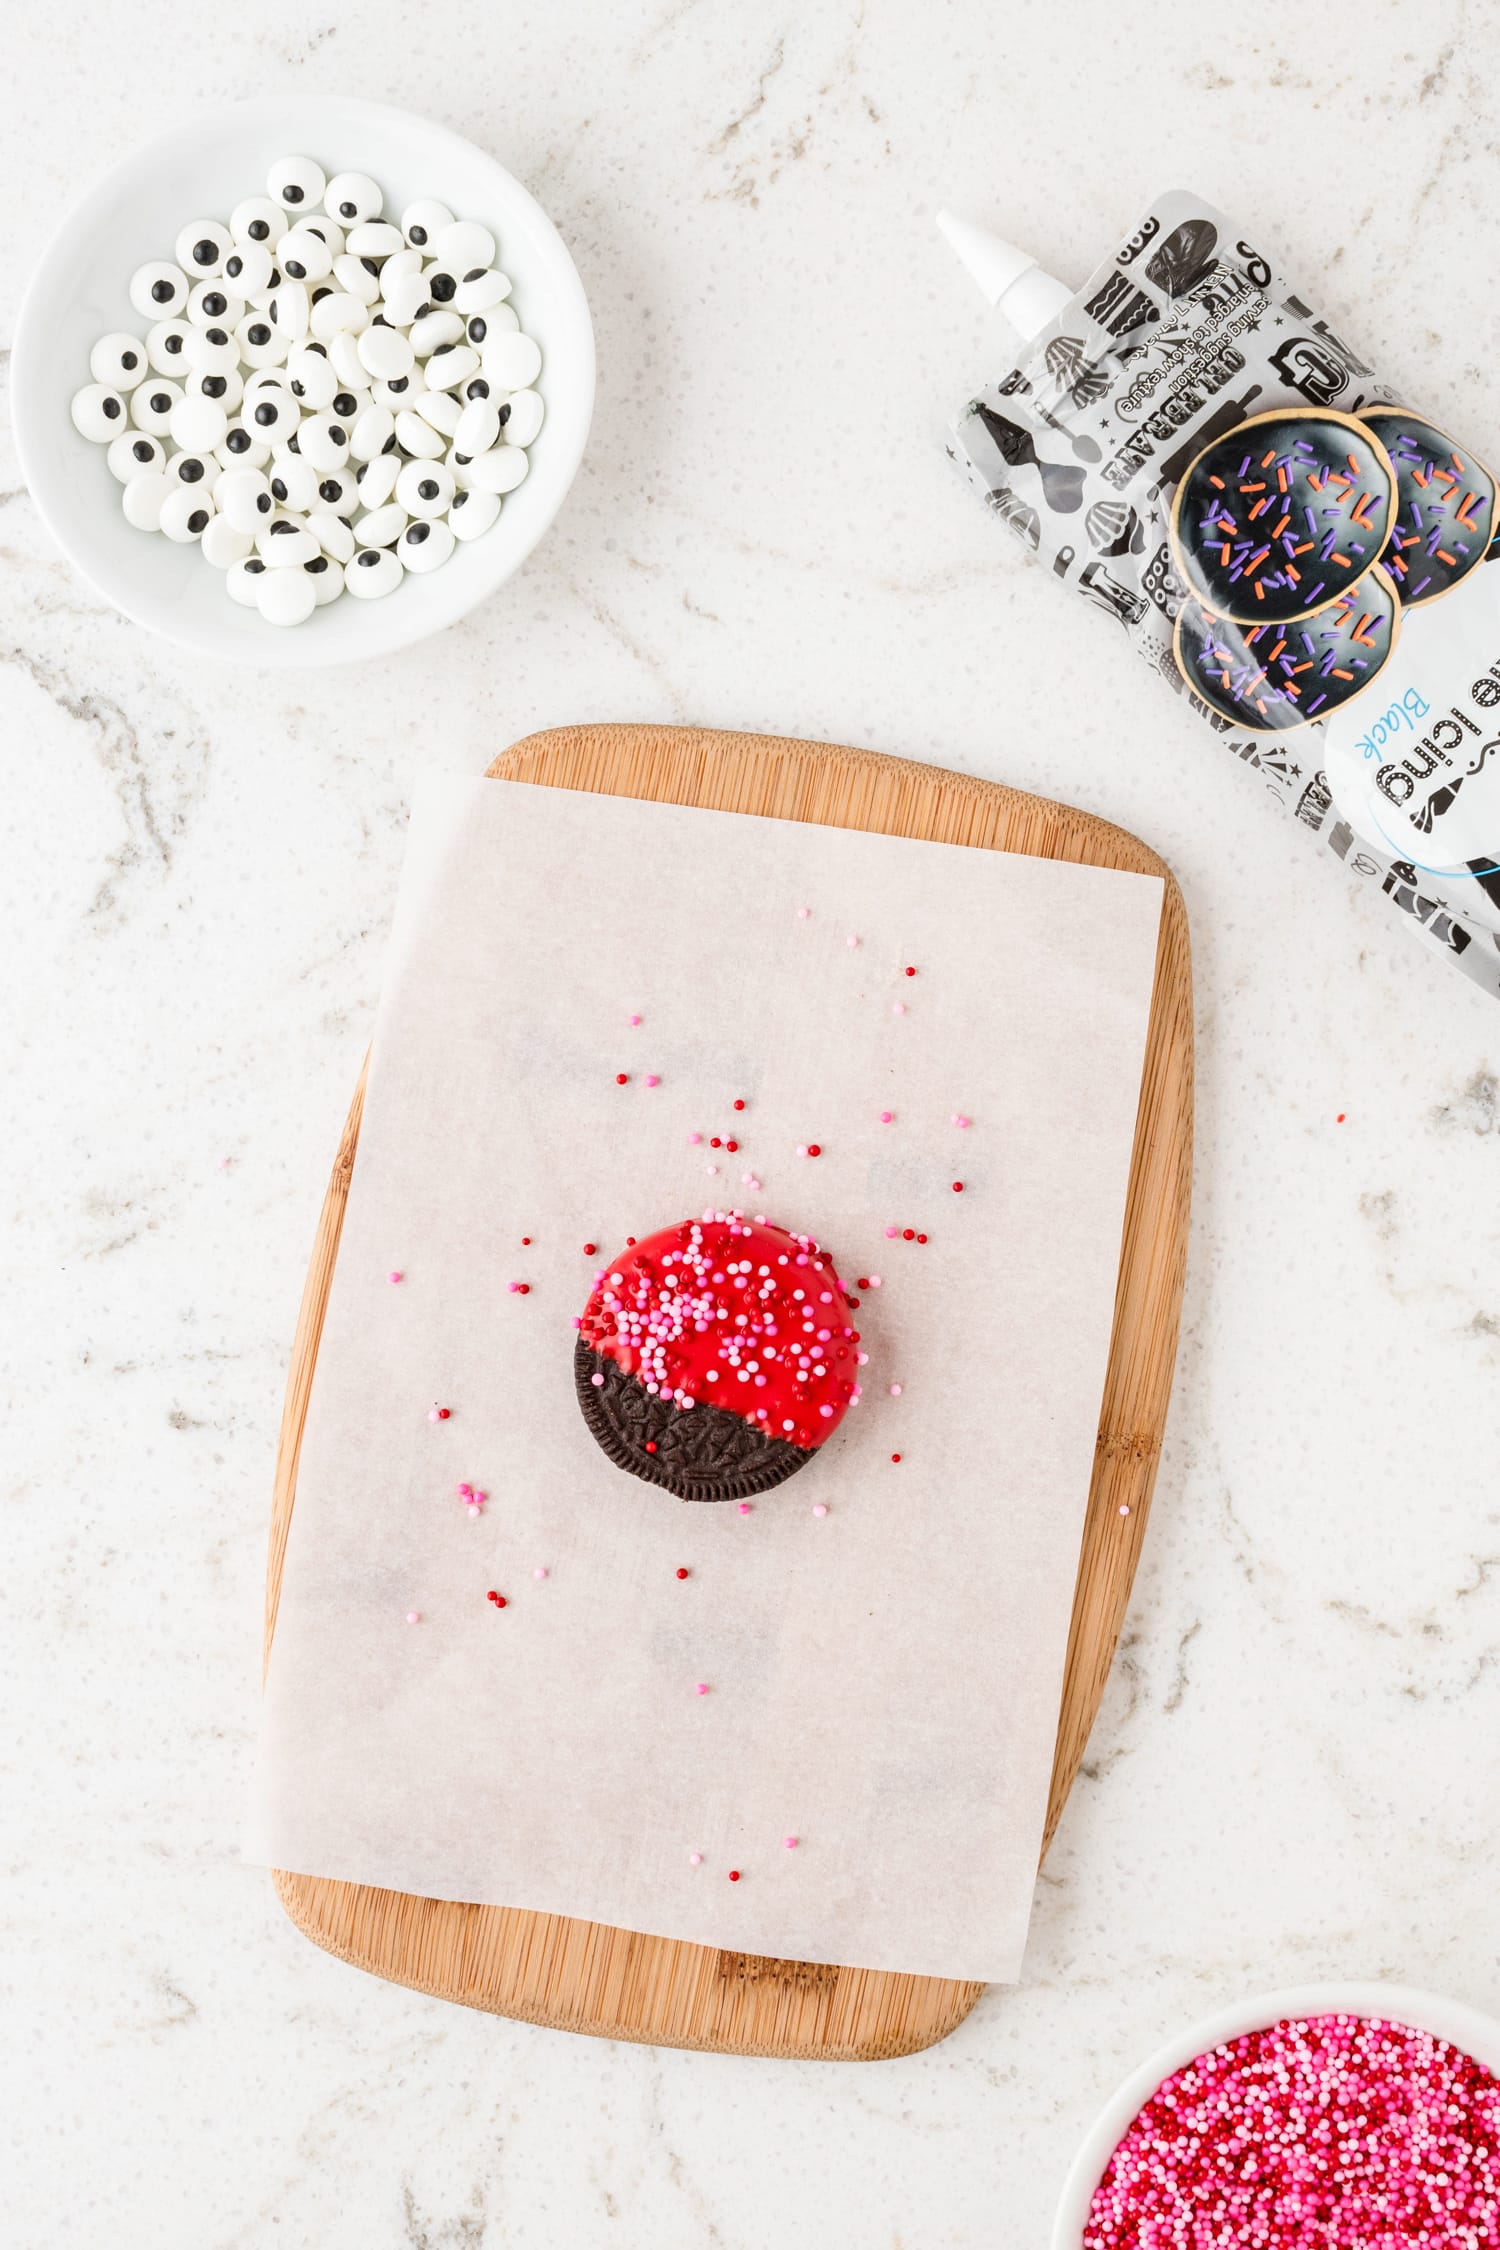 Adding Valentine's sprinkles to candy melt for Lady Bug Oreos